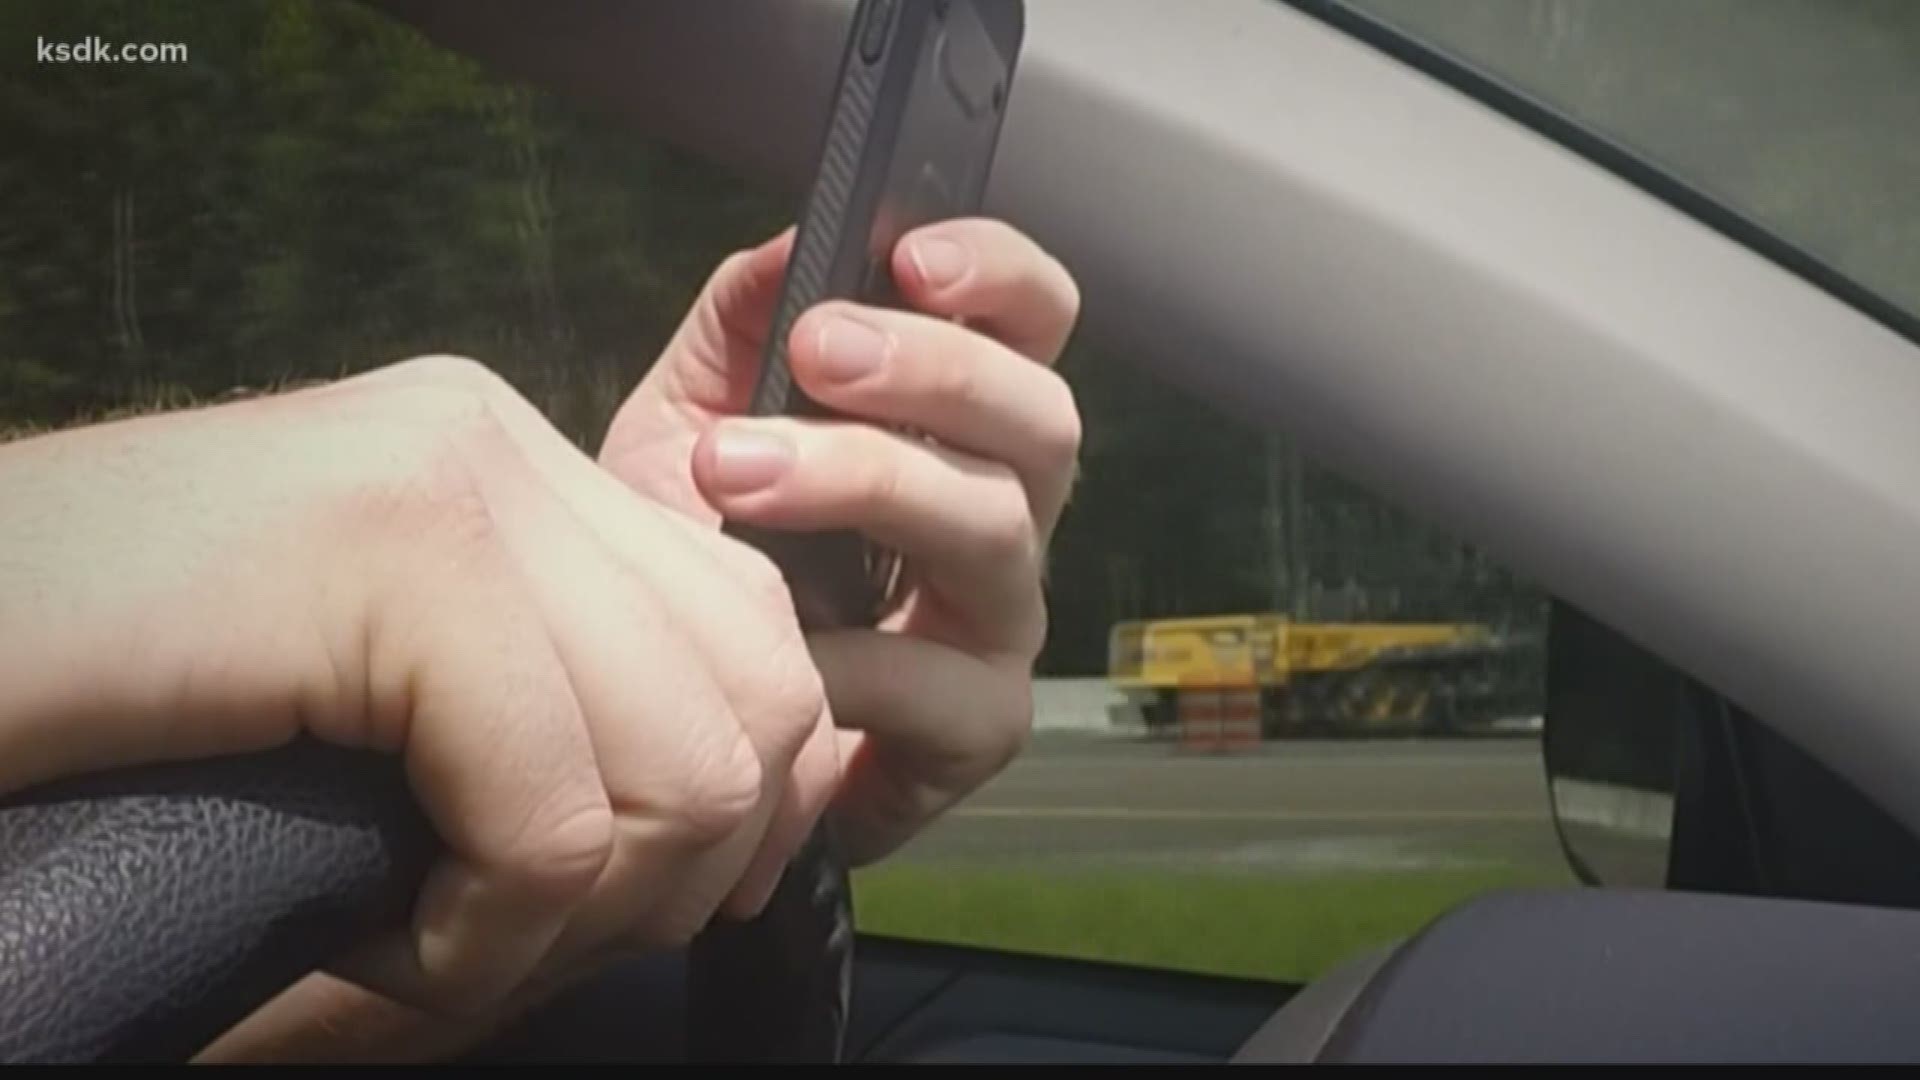 Missouri is one of only two states that doesn't have a complete ban on texting while driving.